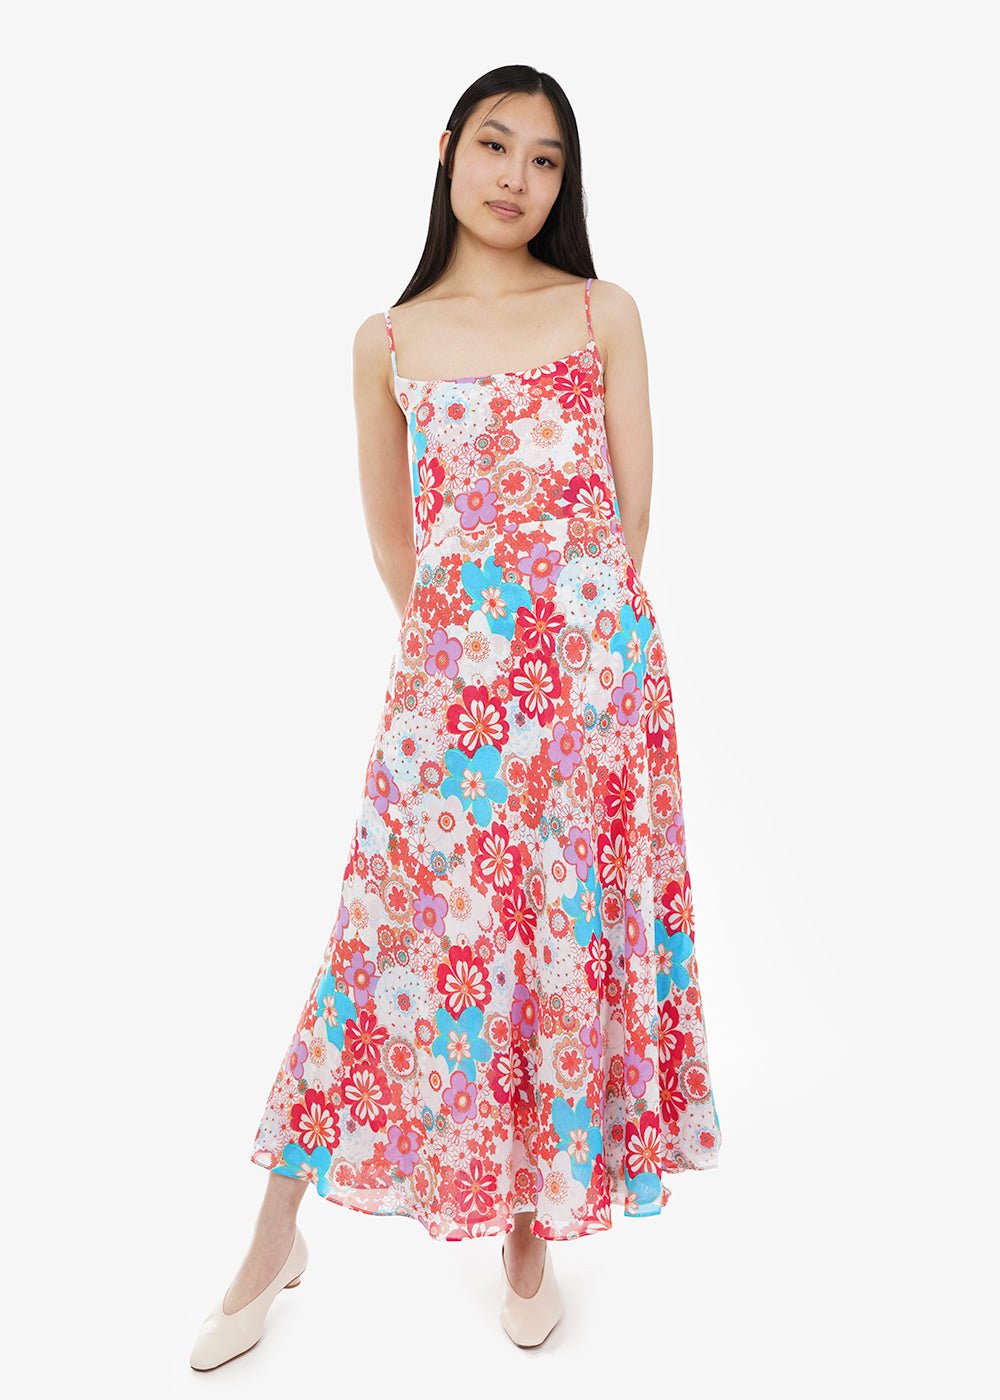 Collina Strada Piccadilly Floral Market Dress - New Classics Studios Sustainable Ethical Fashion Canada